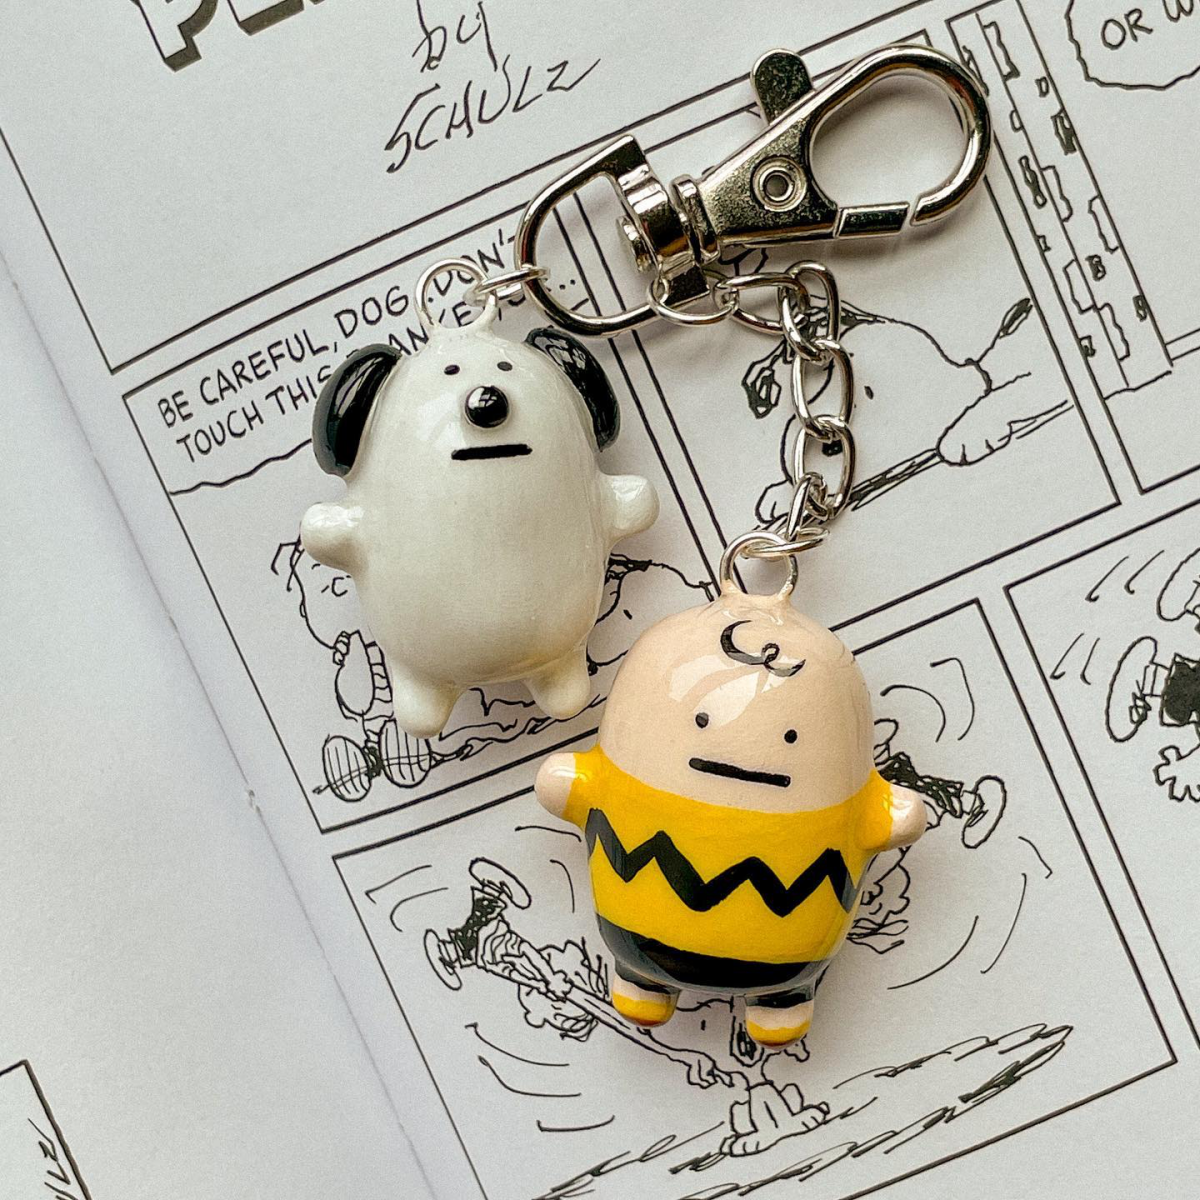 charlie brown and snoopy clay